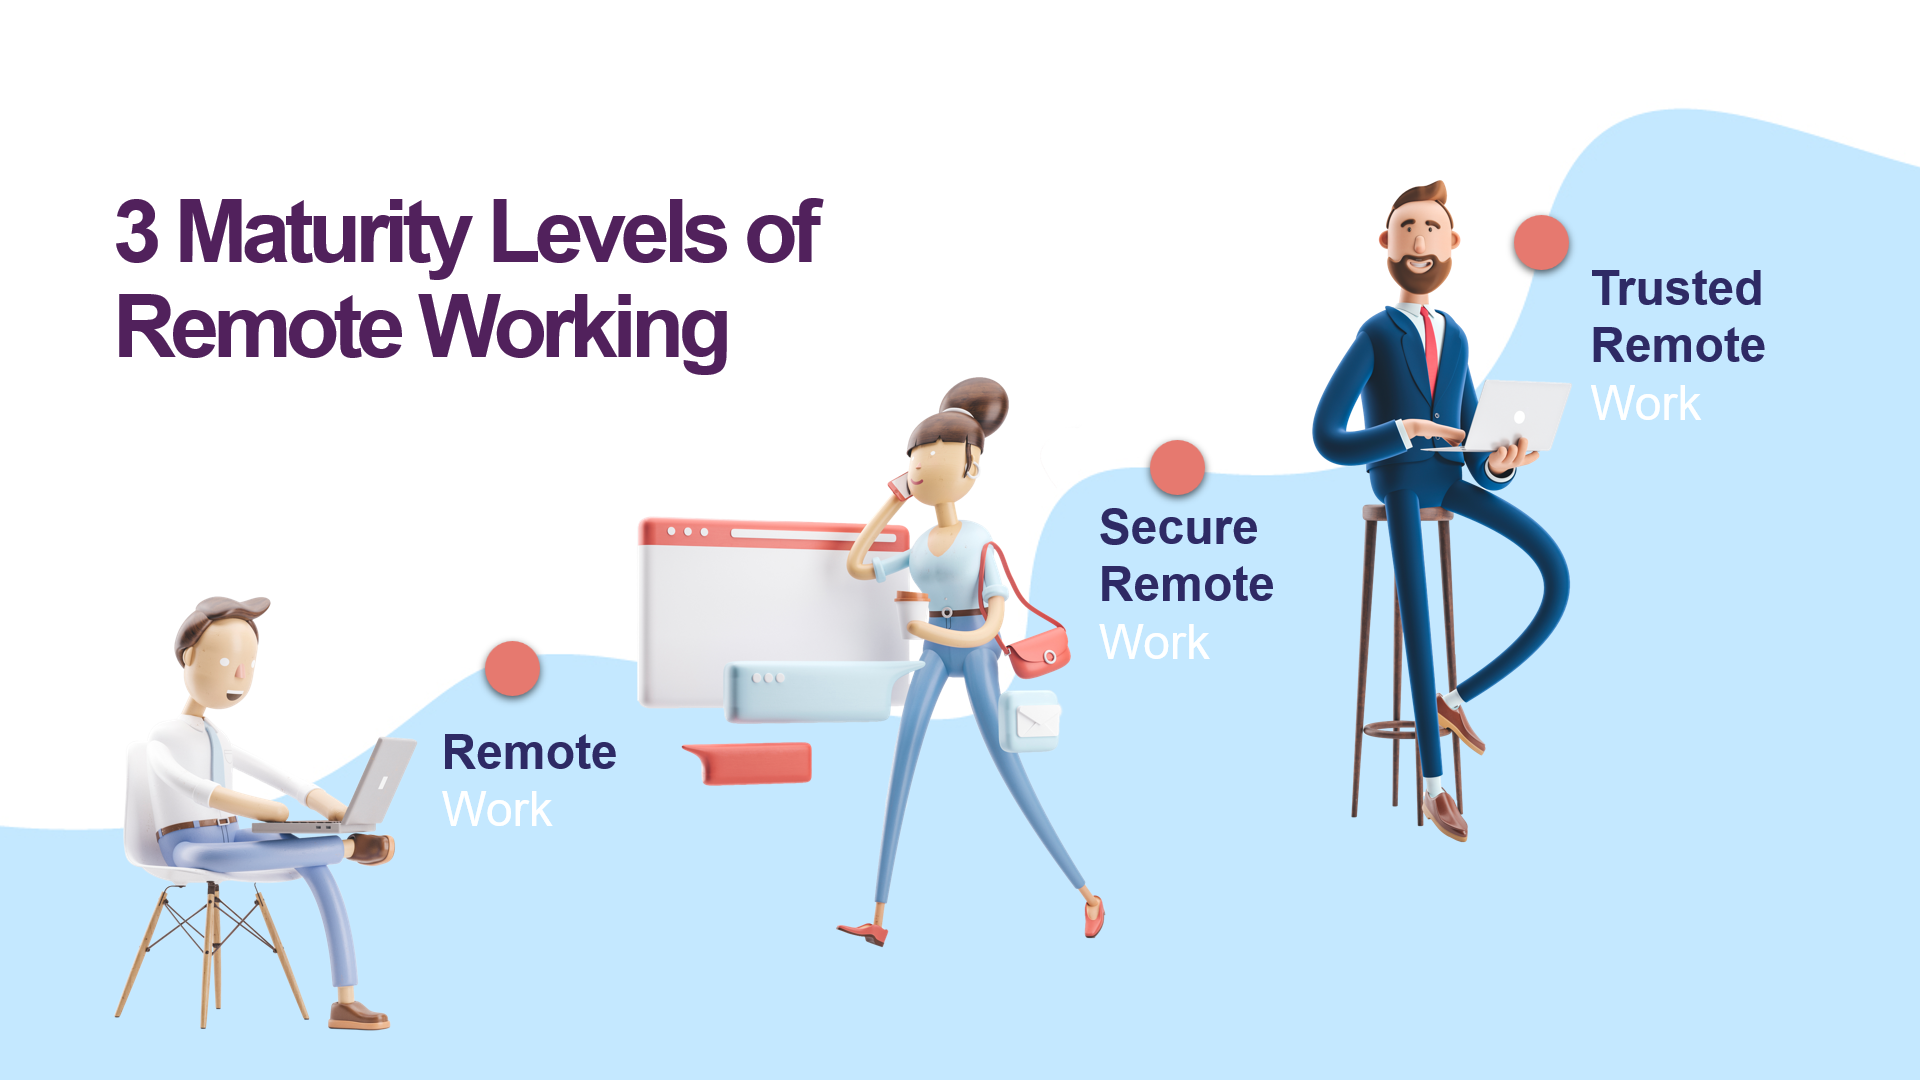 3 Maturity Levels of Remote Working